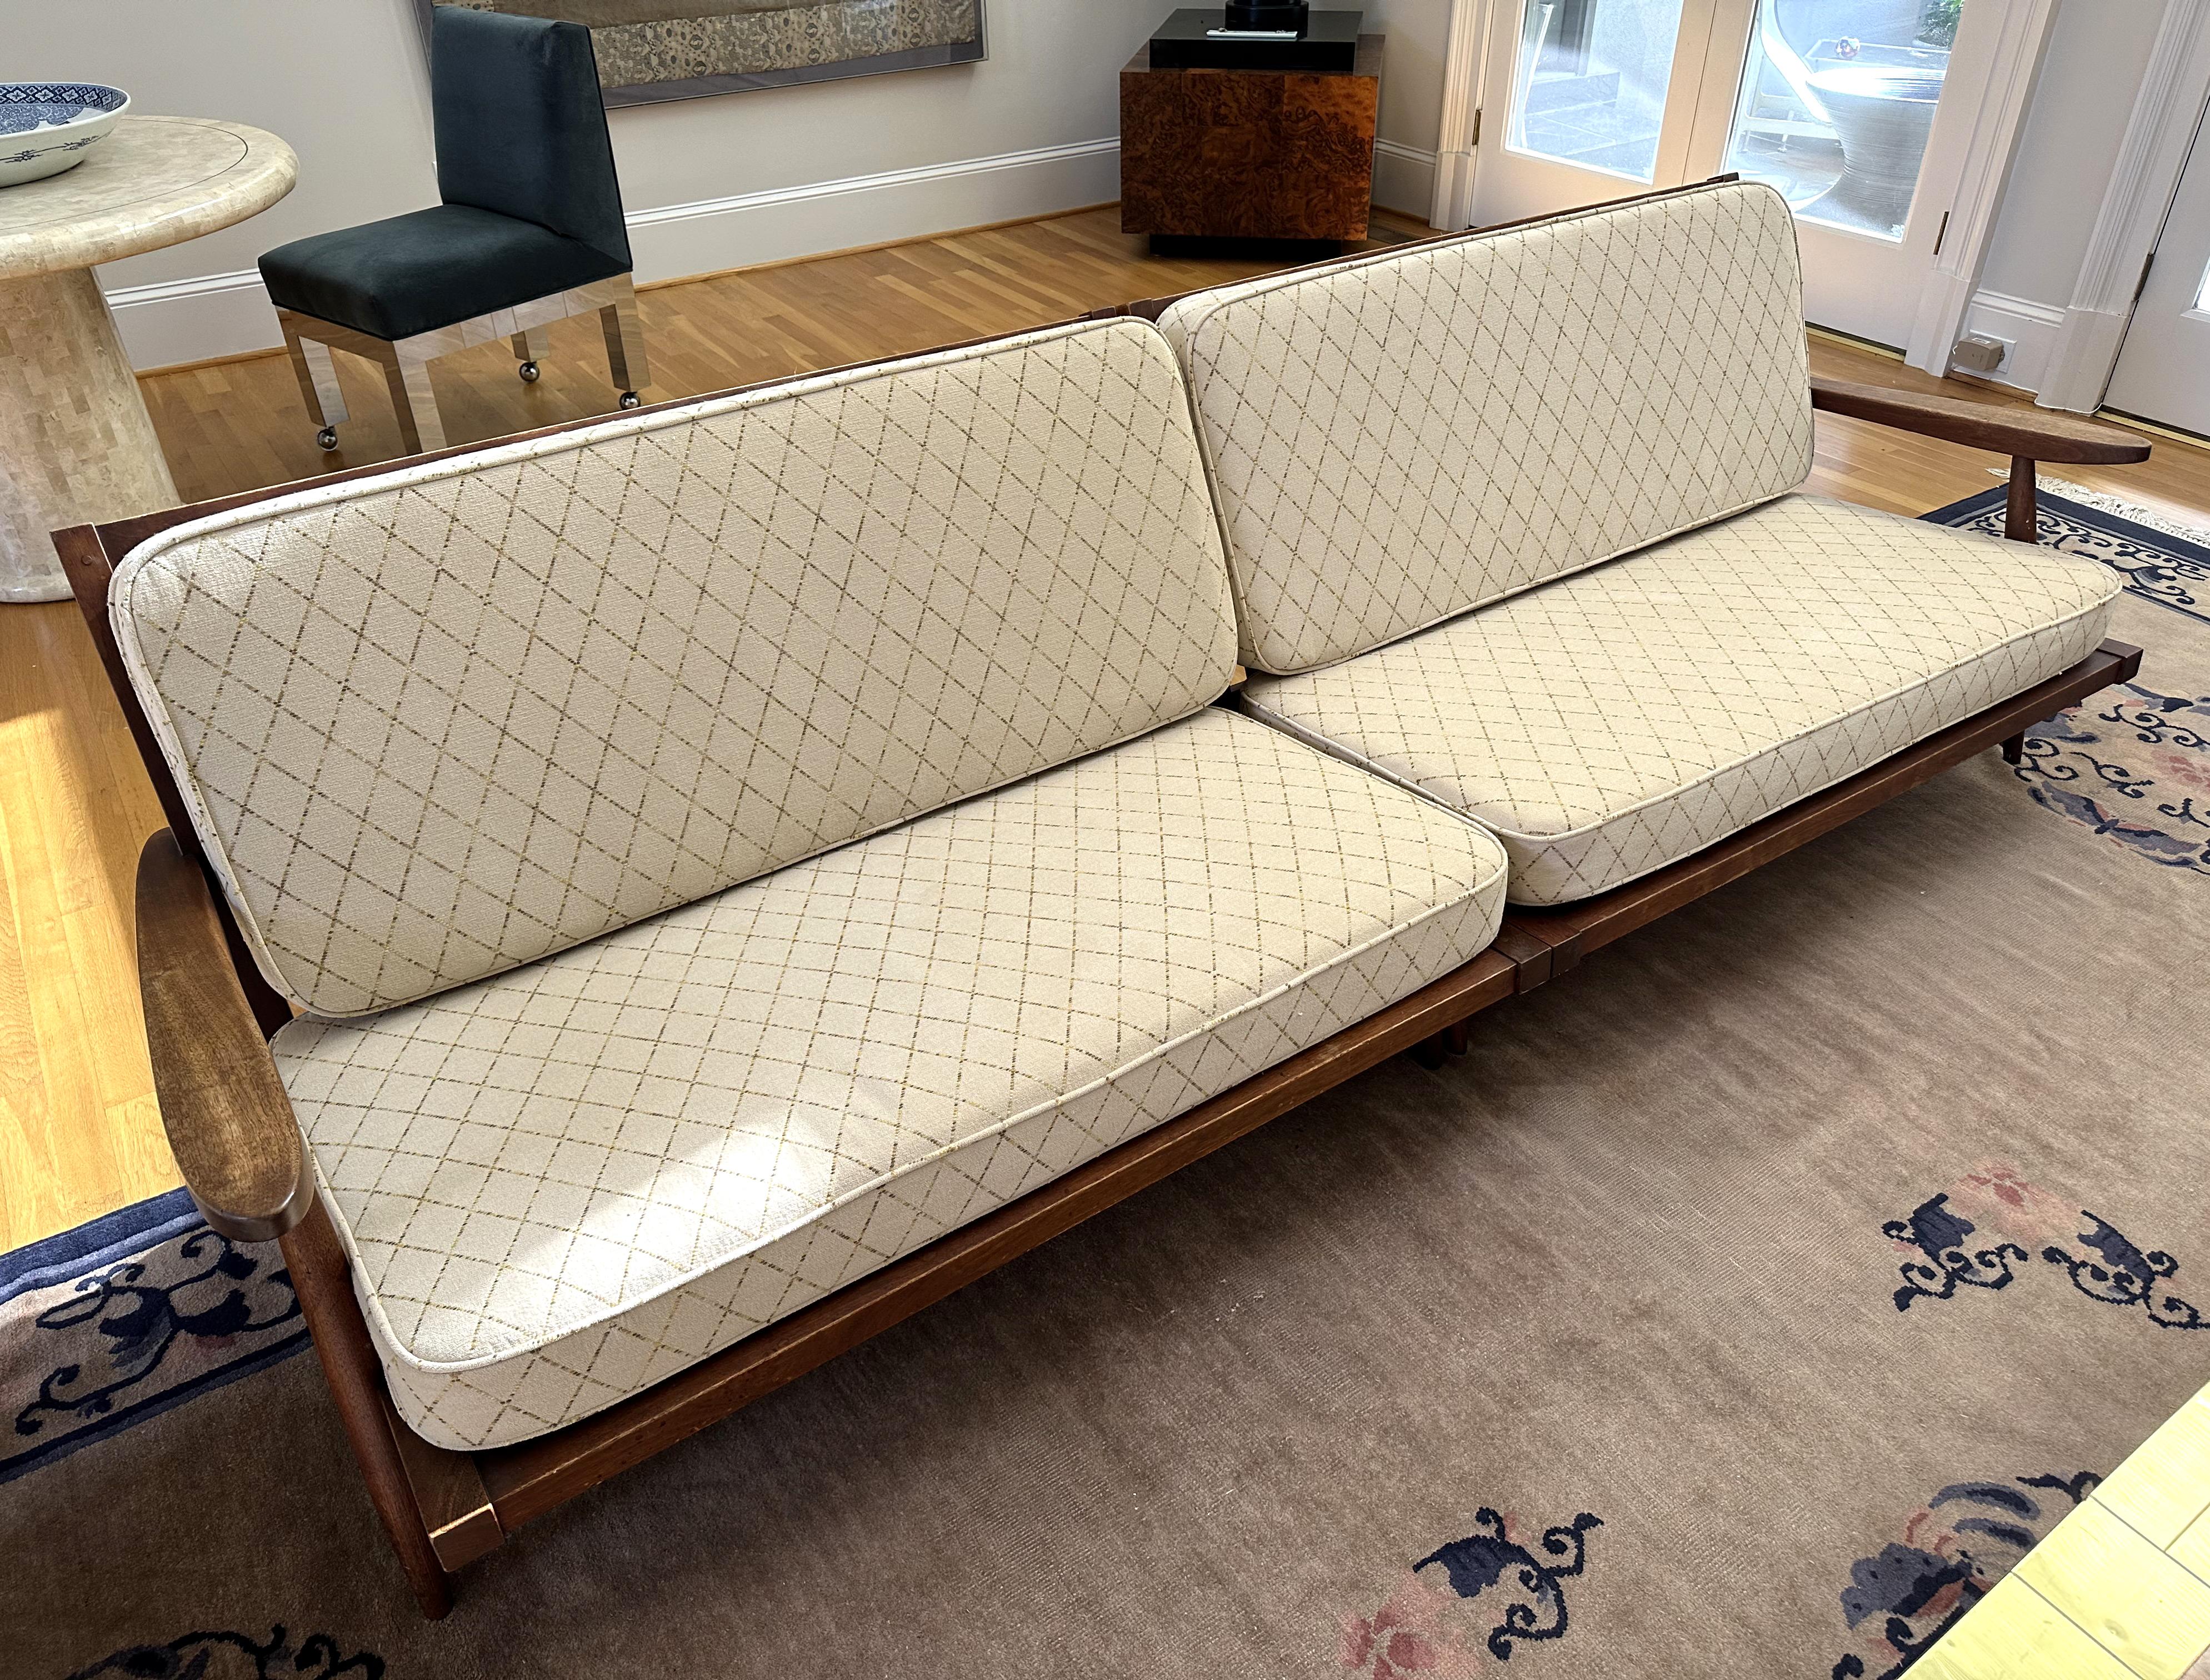 Two single arm walnut settee in a rare sectional configuration, custom-made and gifted to a family friend, circa 1950s by George Nakashima in his New Hope Studio. The two settees can be used as an opposing pair, a L-shape configuration or a very